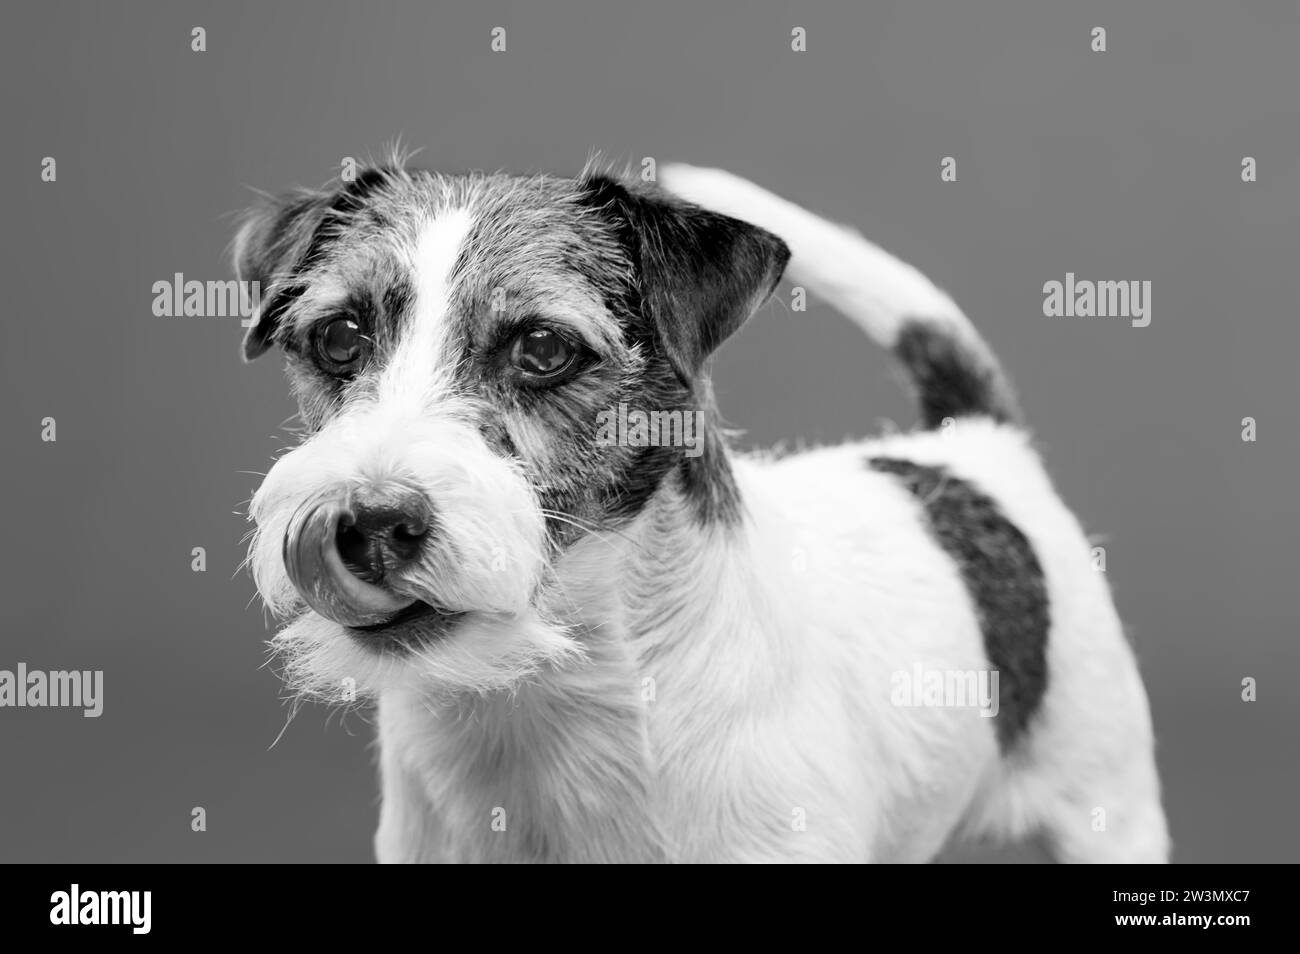 Purebred Jack Russell posing in the studio and looking at the camera. Mixed media Stock Photo